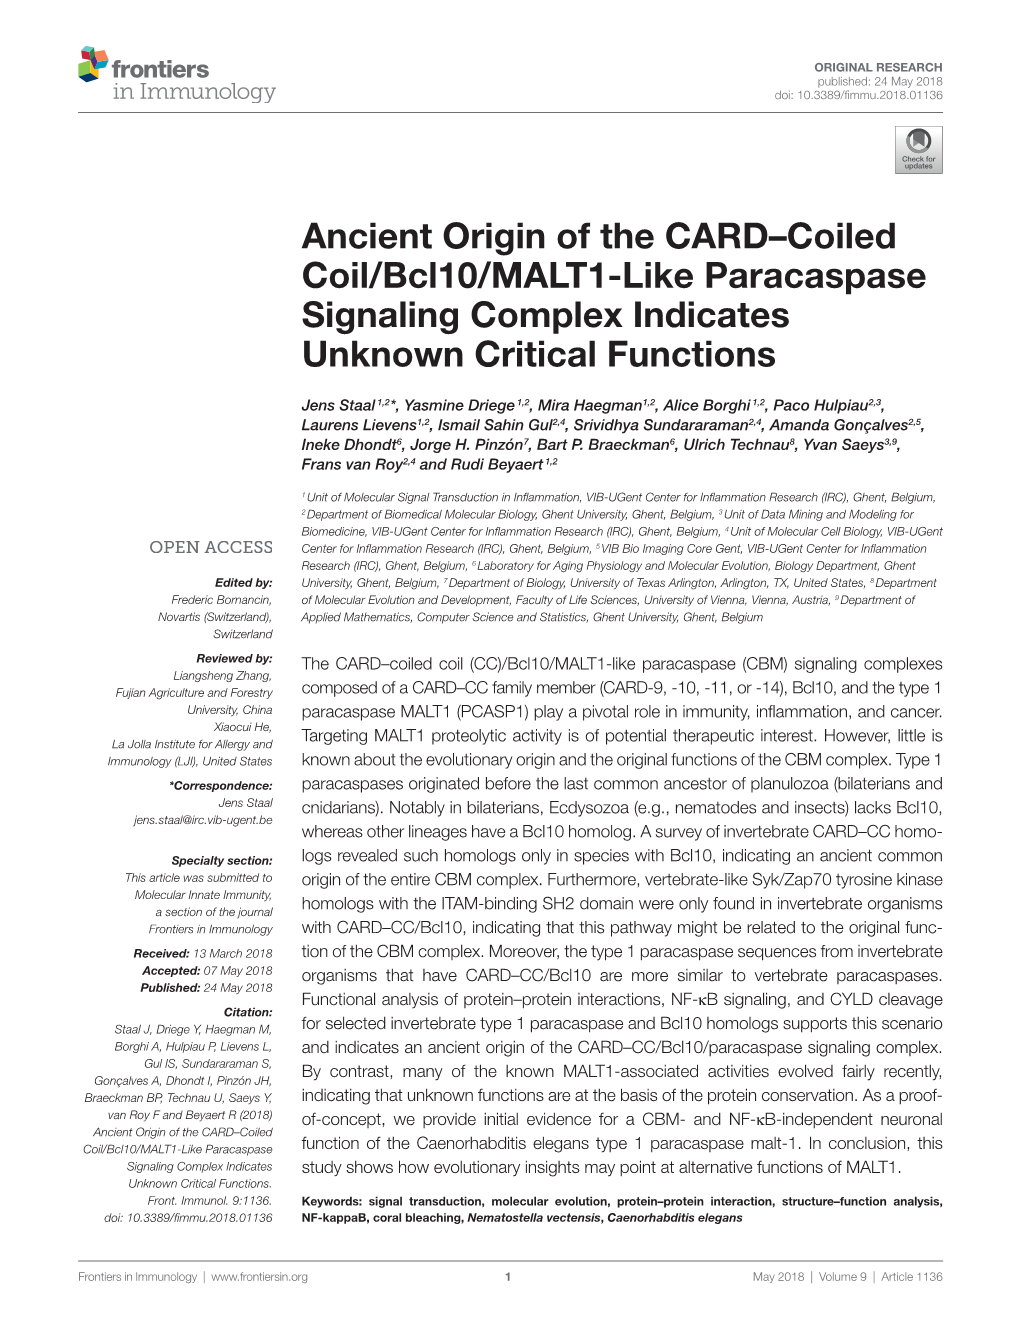 Ancient Origin of the CARD–Coiled Coil/Bcl10/MALT1-Like Paracaspase Signaling Complex Indicates Unknown Critical Functions